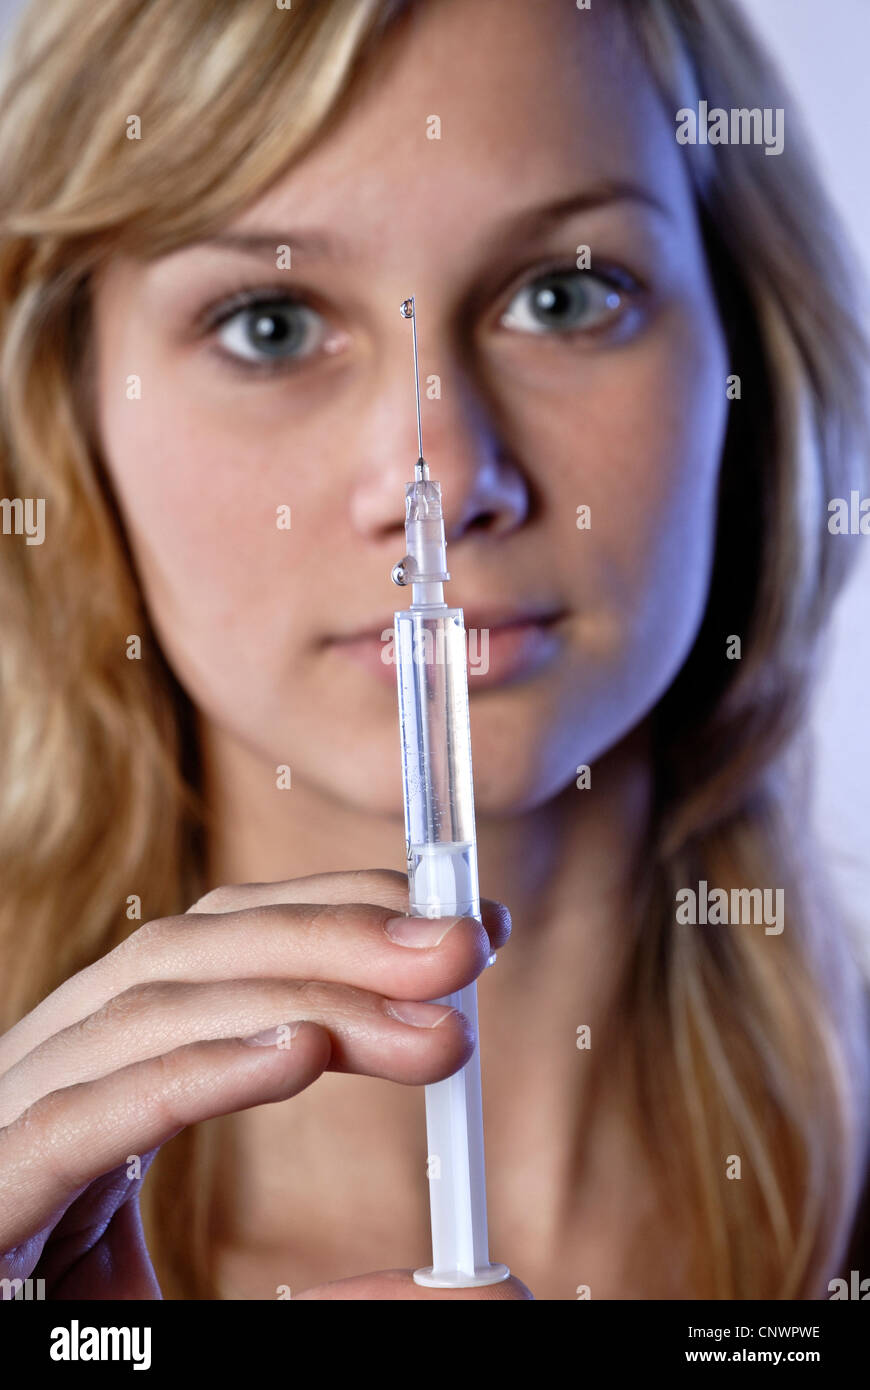 Young woman with blond hair with a syringe as a symbol for drug addiction. Stock Photo